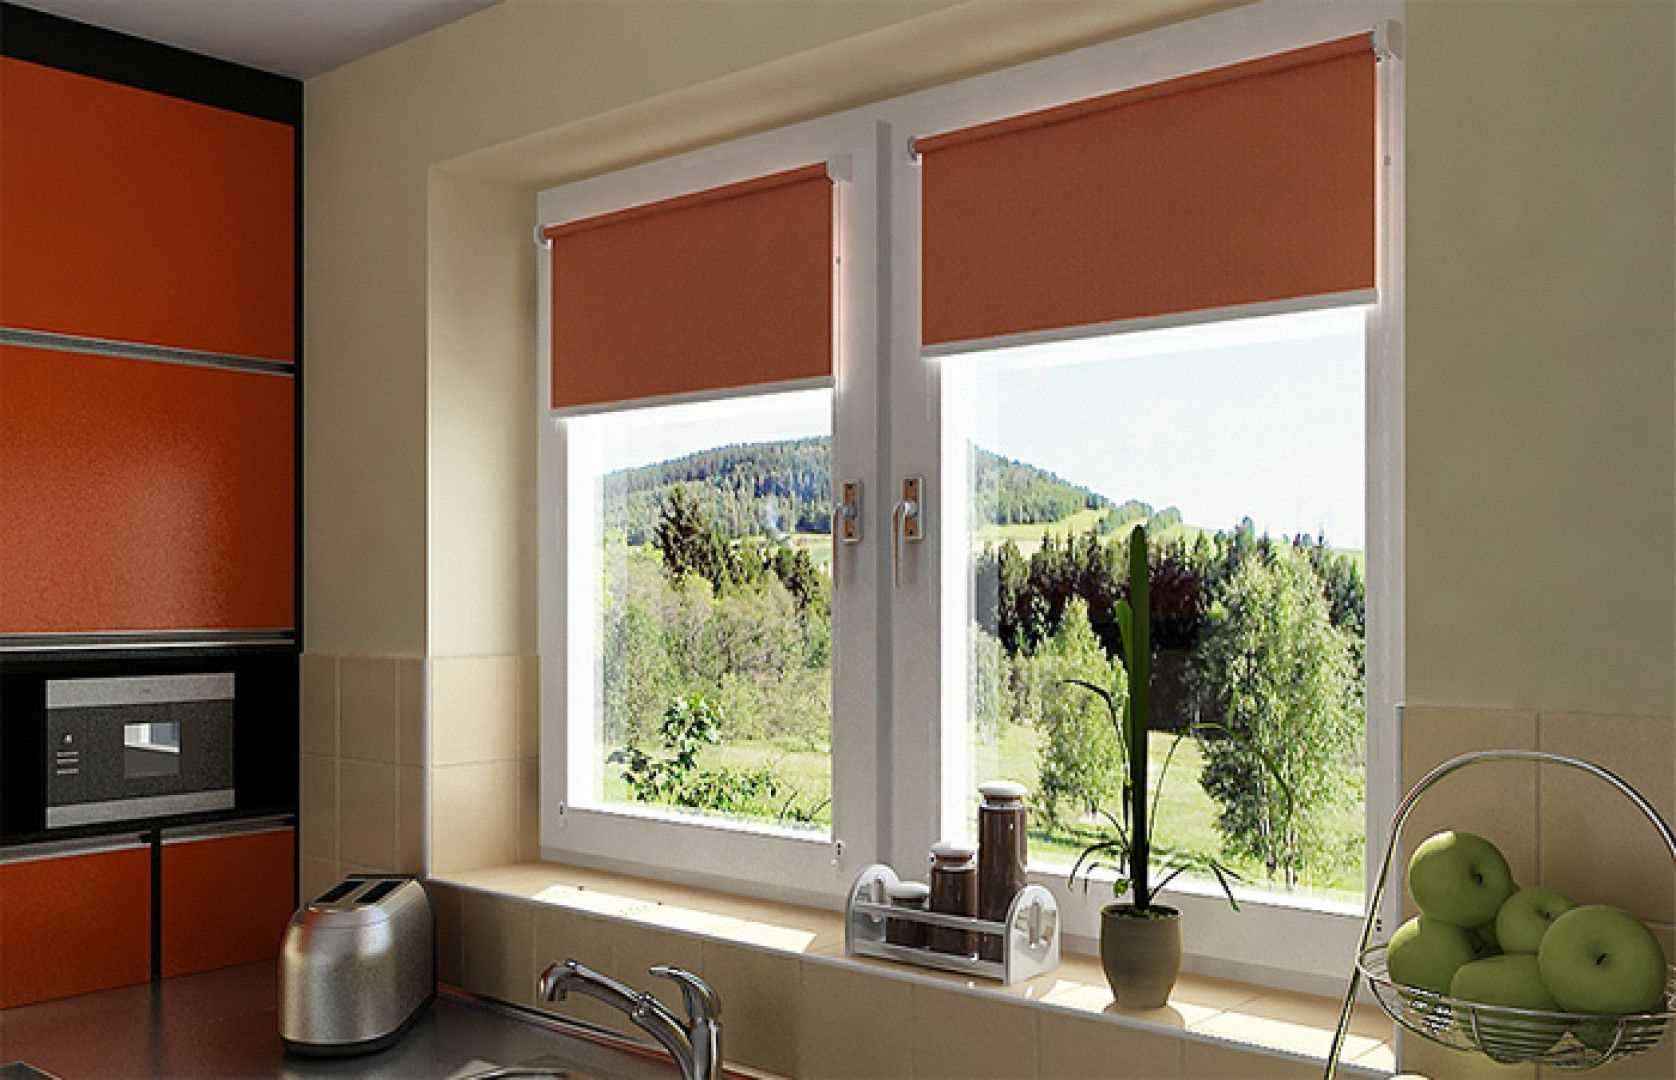 the option of using modern curtains in a bright room interior